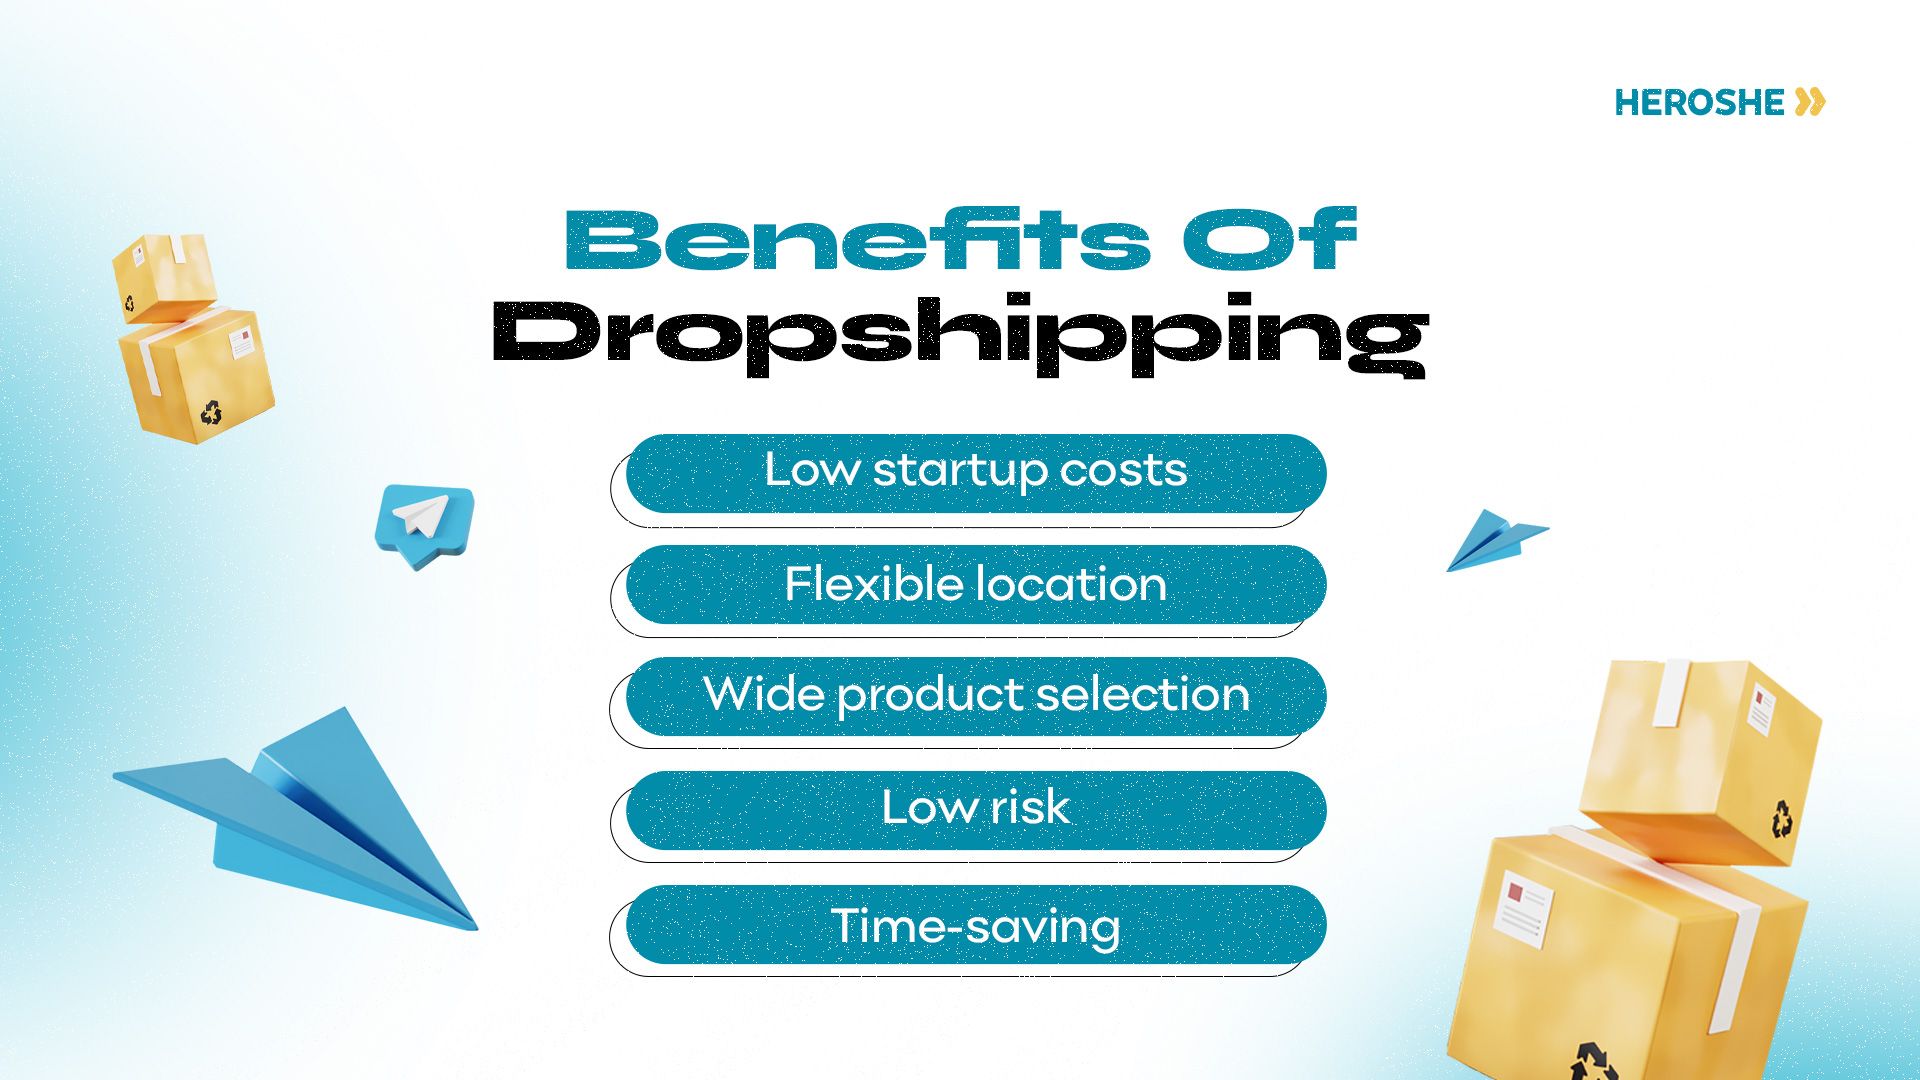 What are the benefits of dropshipping?